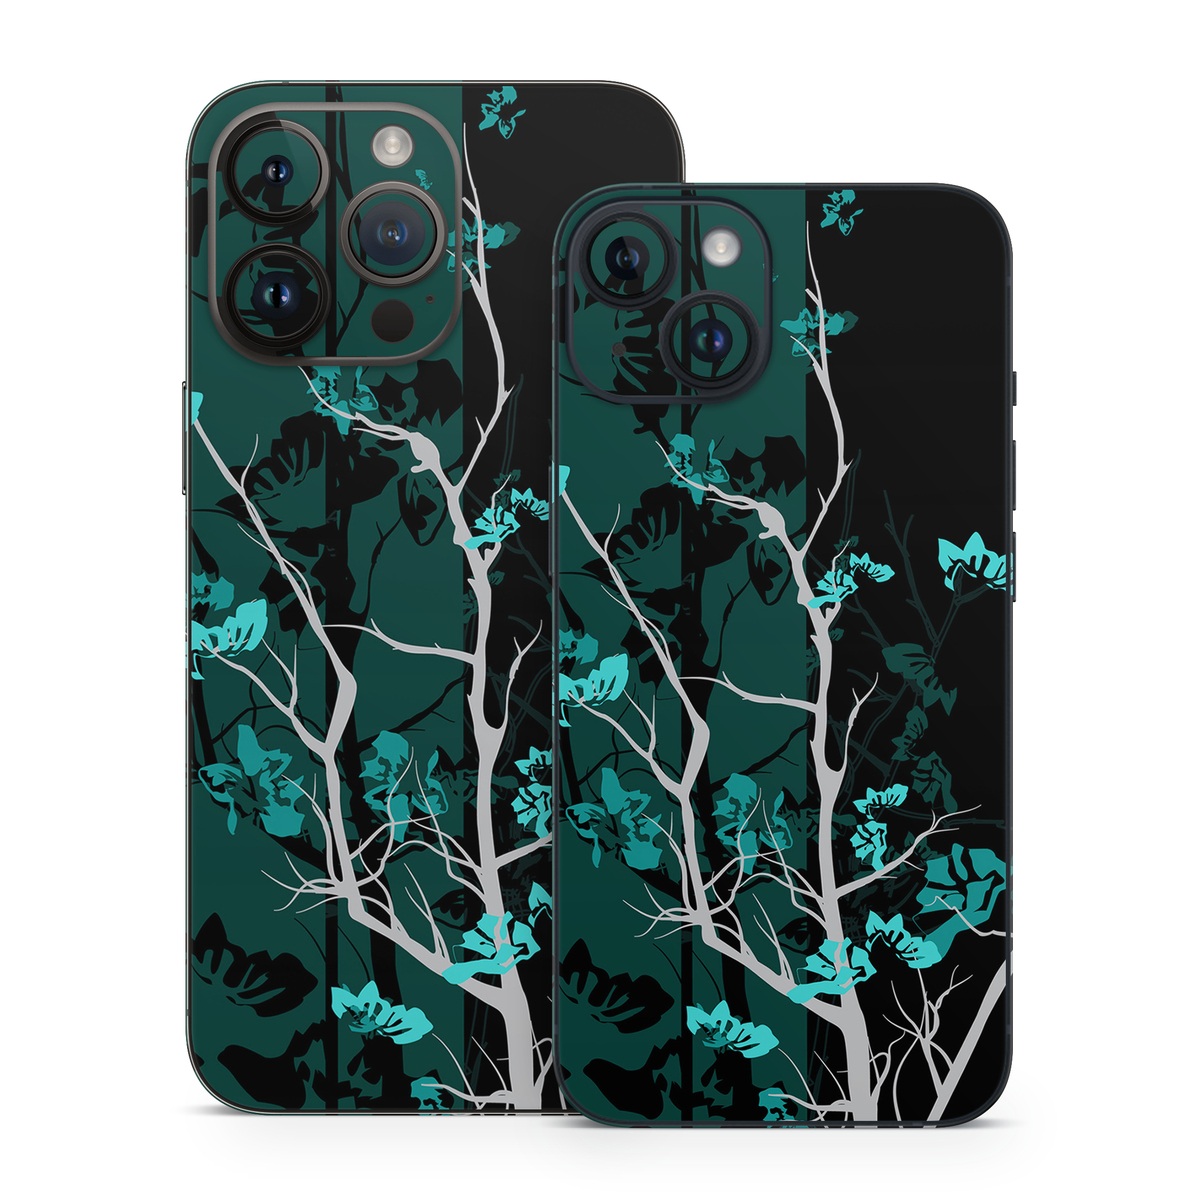 iPhone 14 Skin design of Branch, Black, Blue, Green, Turquoise, Teal, Tree, Plant, Graphic design, Twig, with black, blue, gray colors